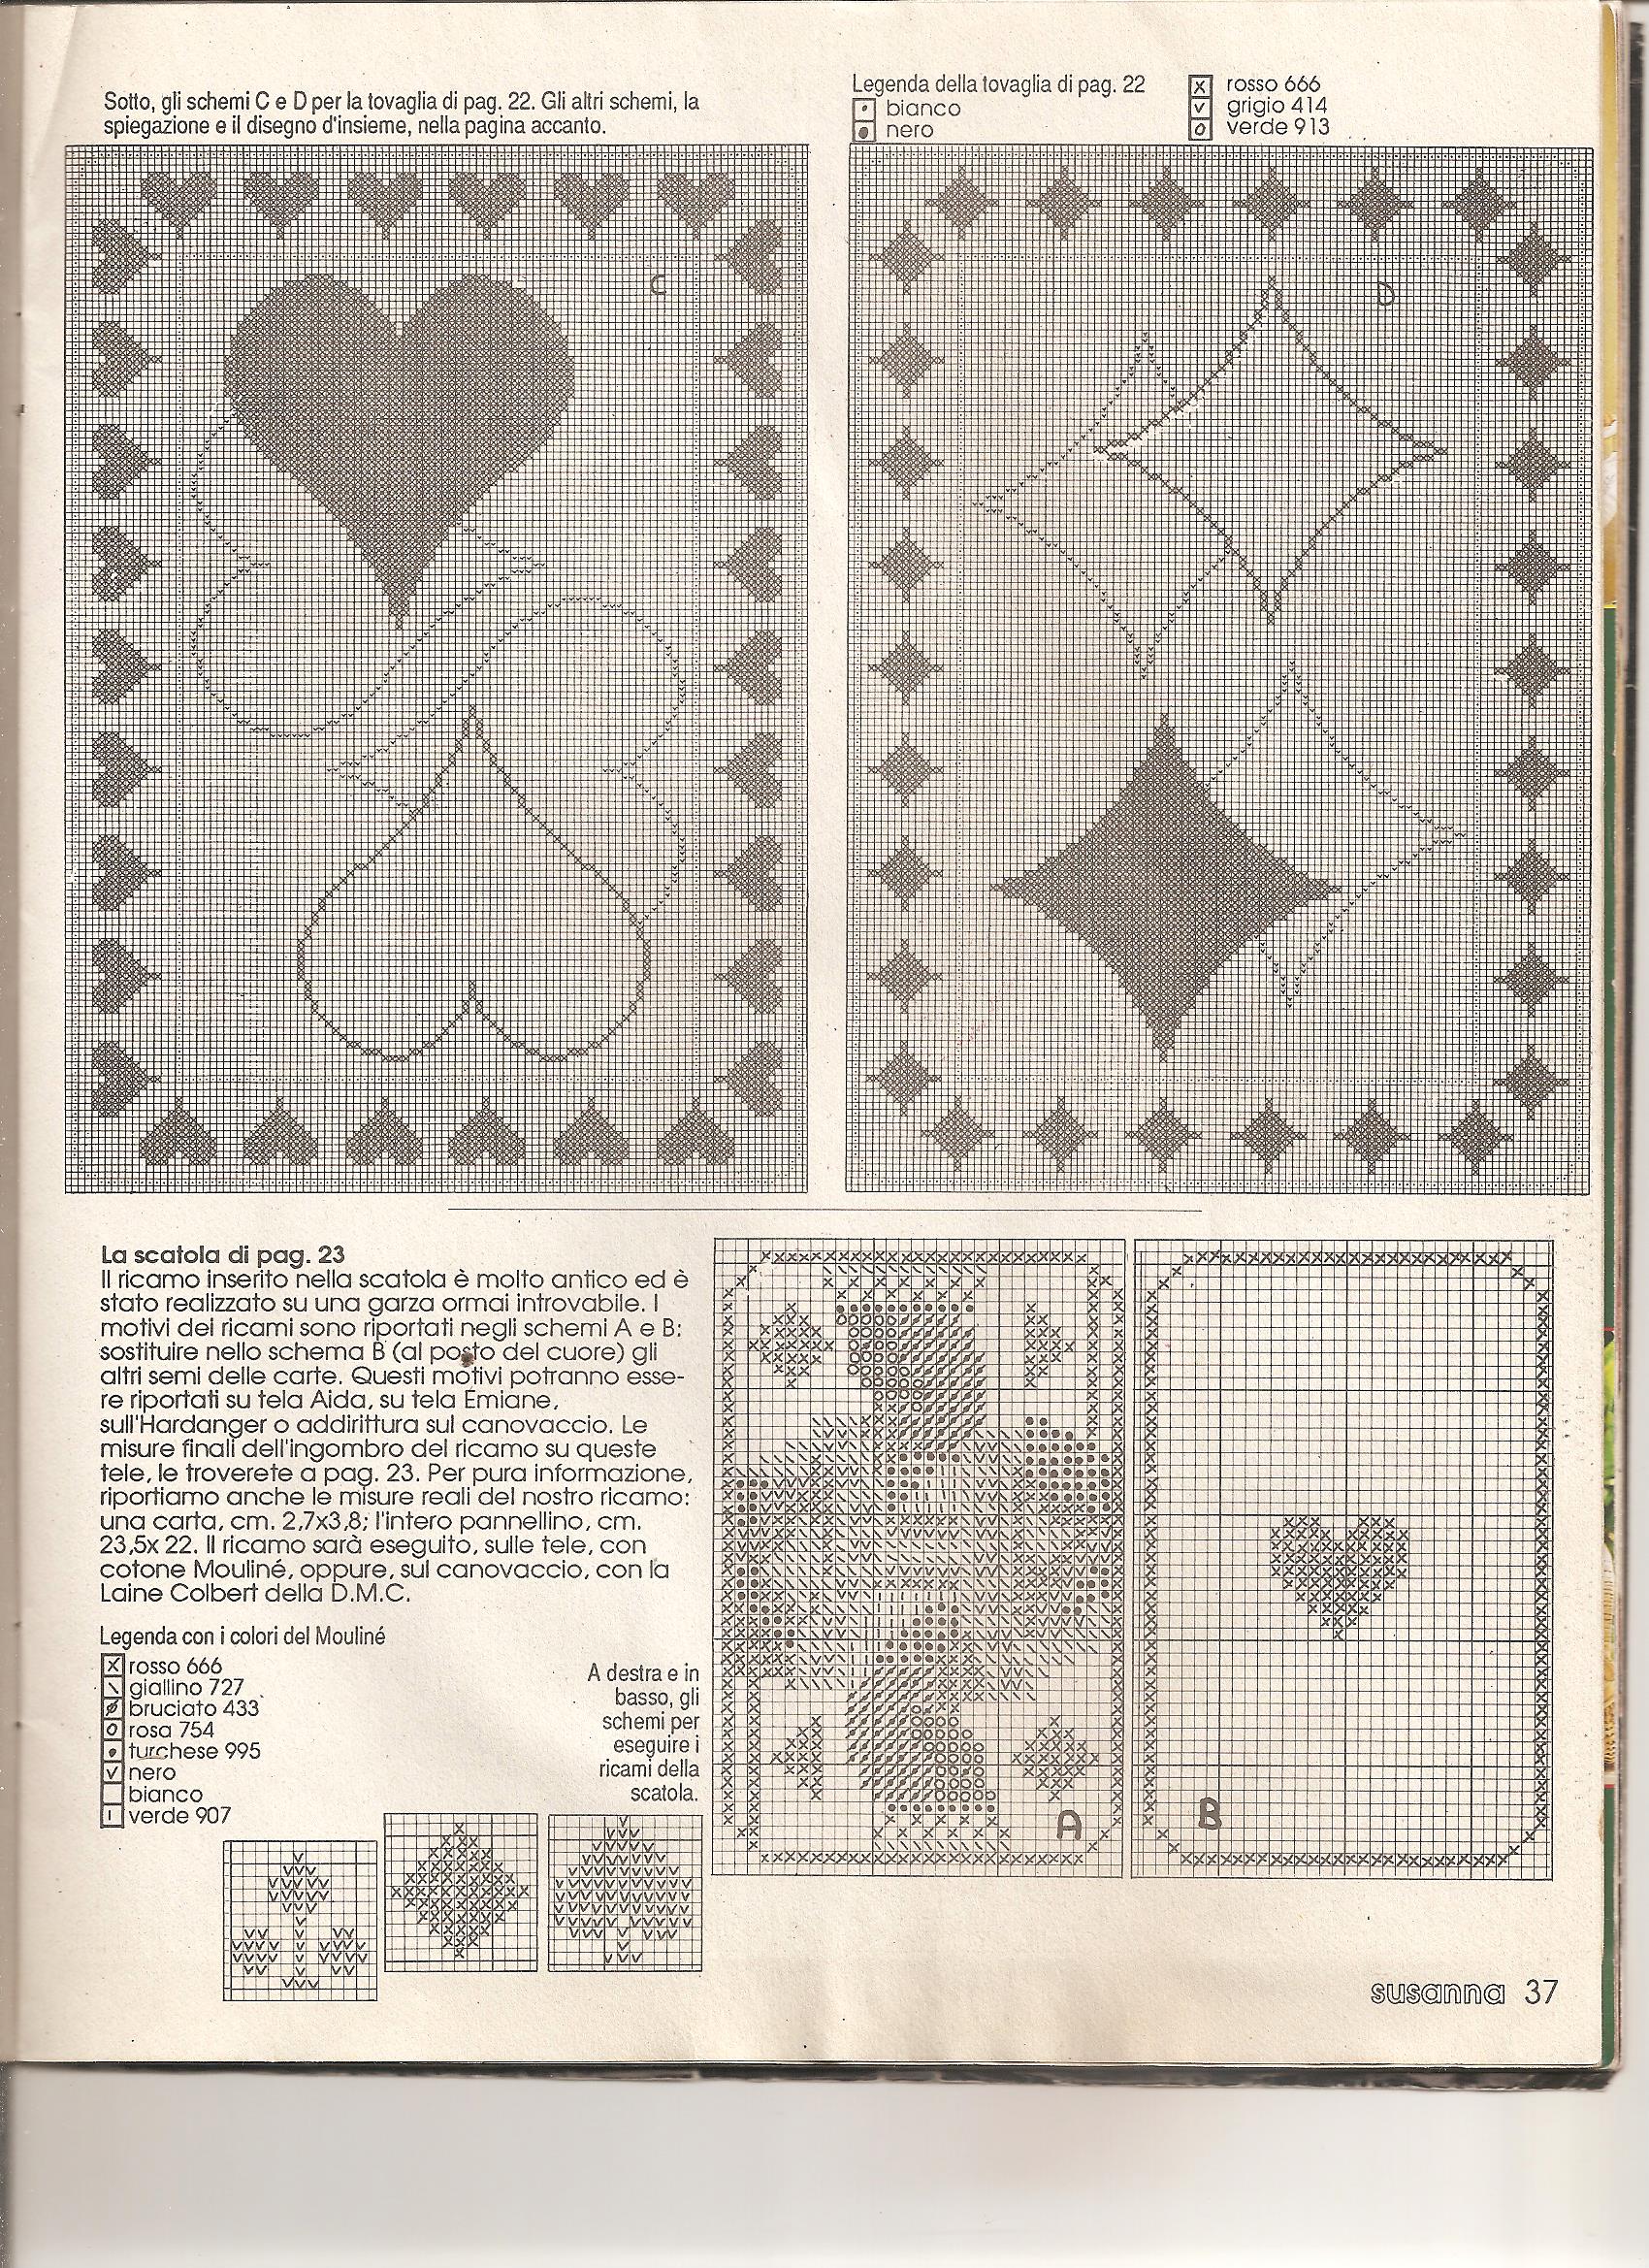 tablecloth game cards (4)